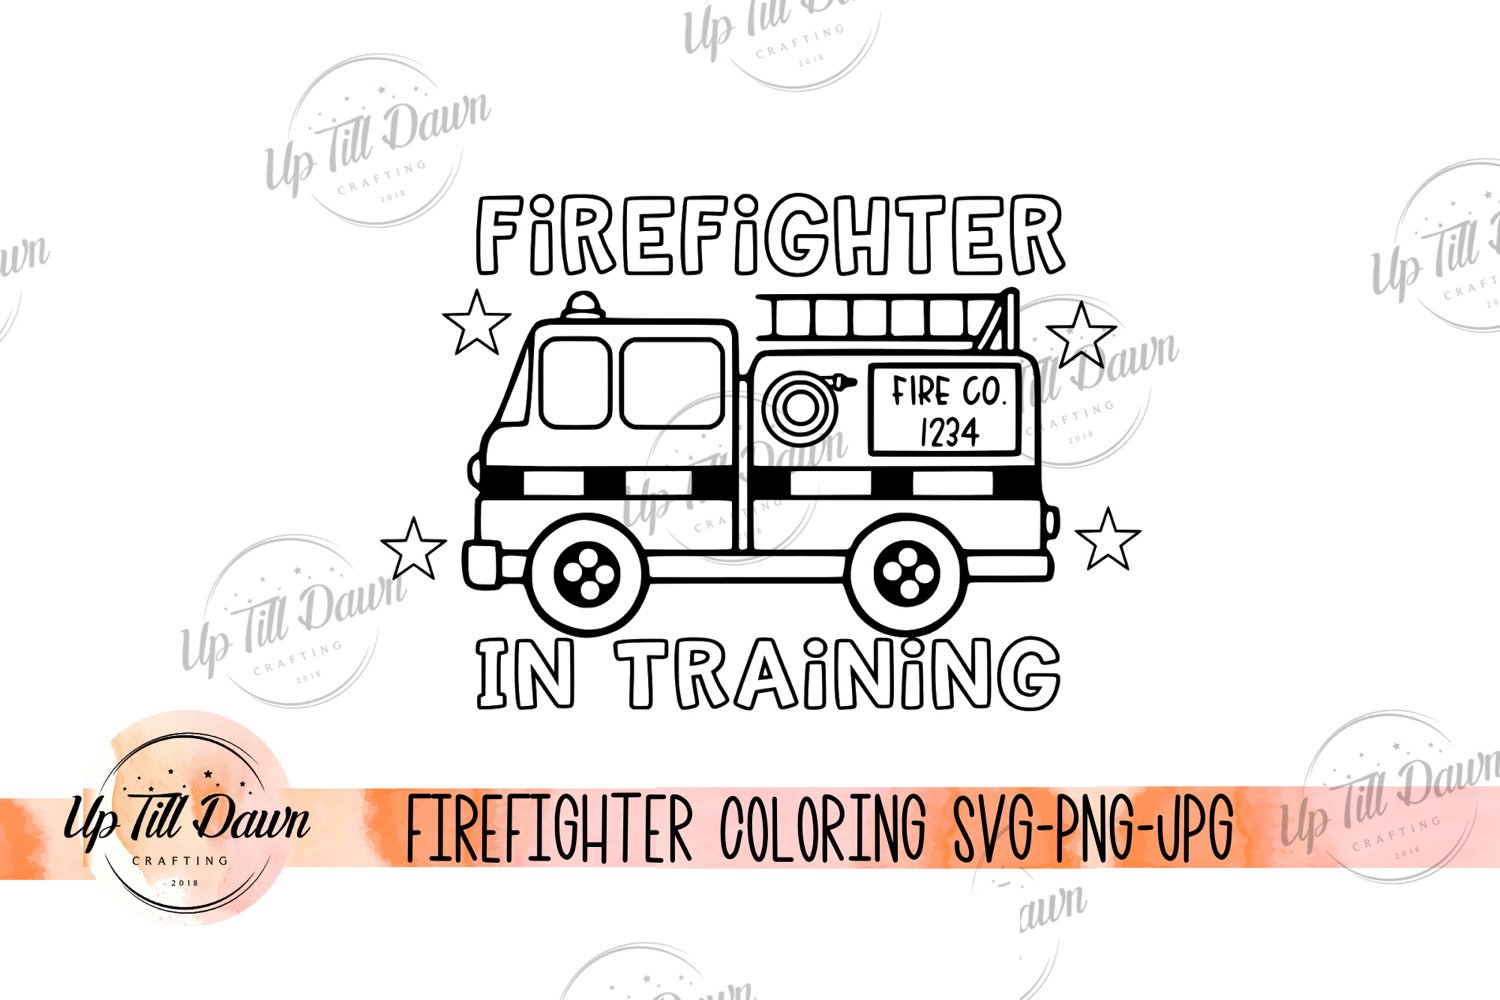 This is a digital download cut file for the "Firefighter Coloring SVG".